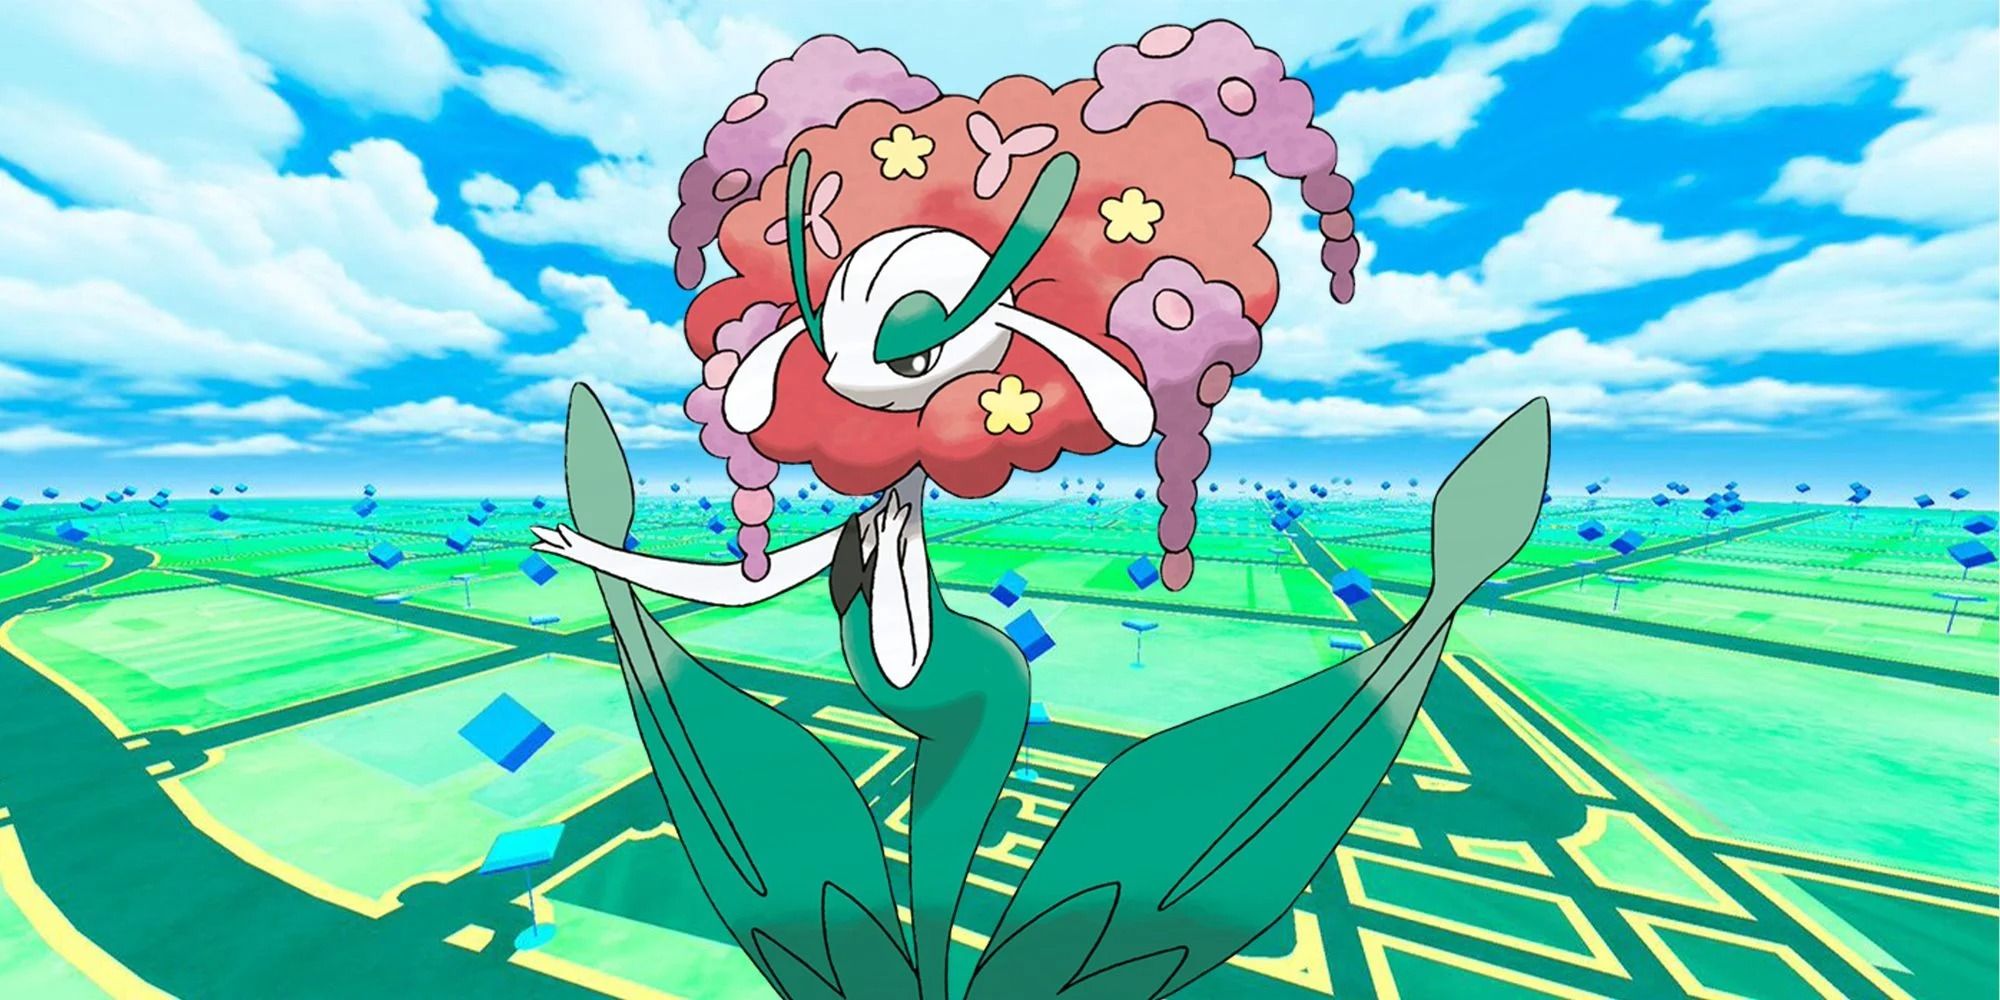 Florges from the anime series Pokémon 